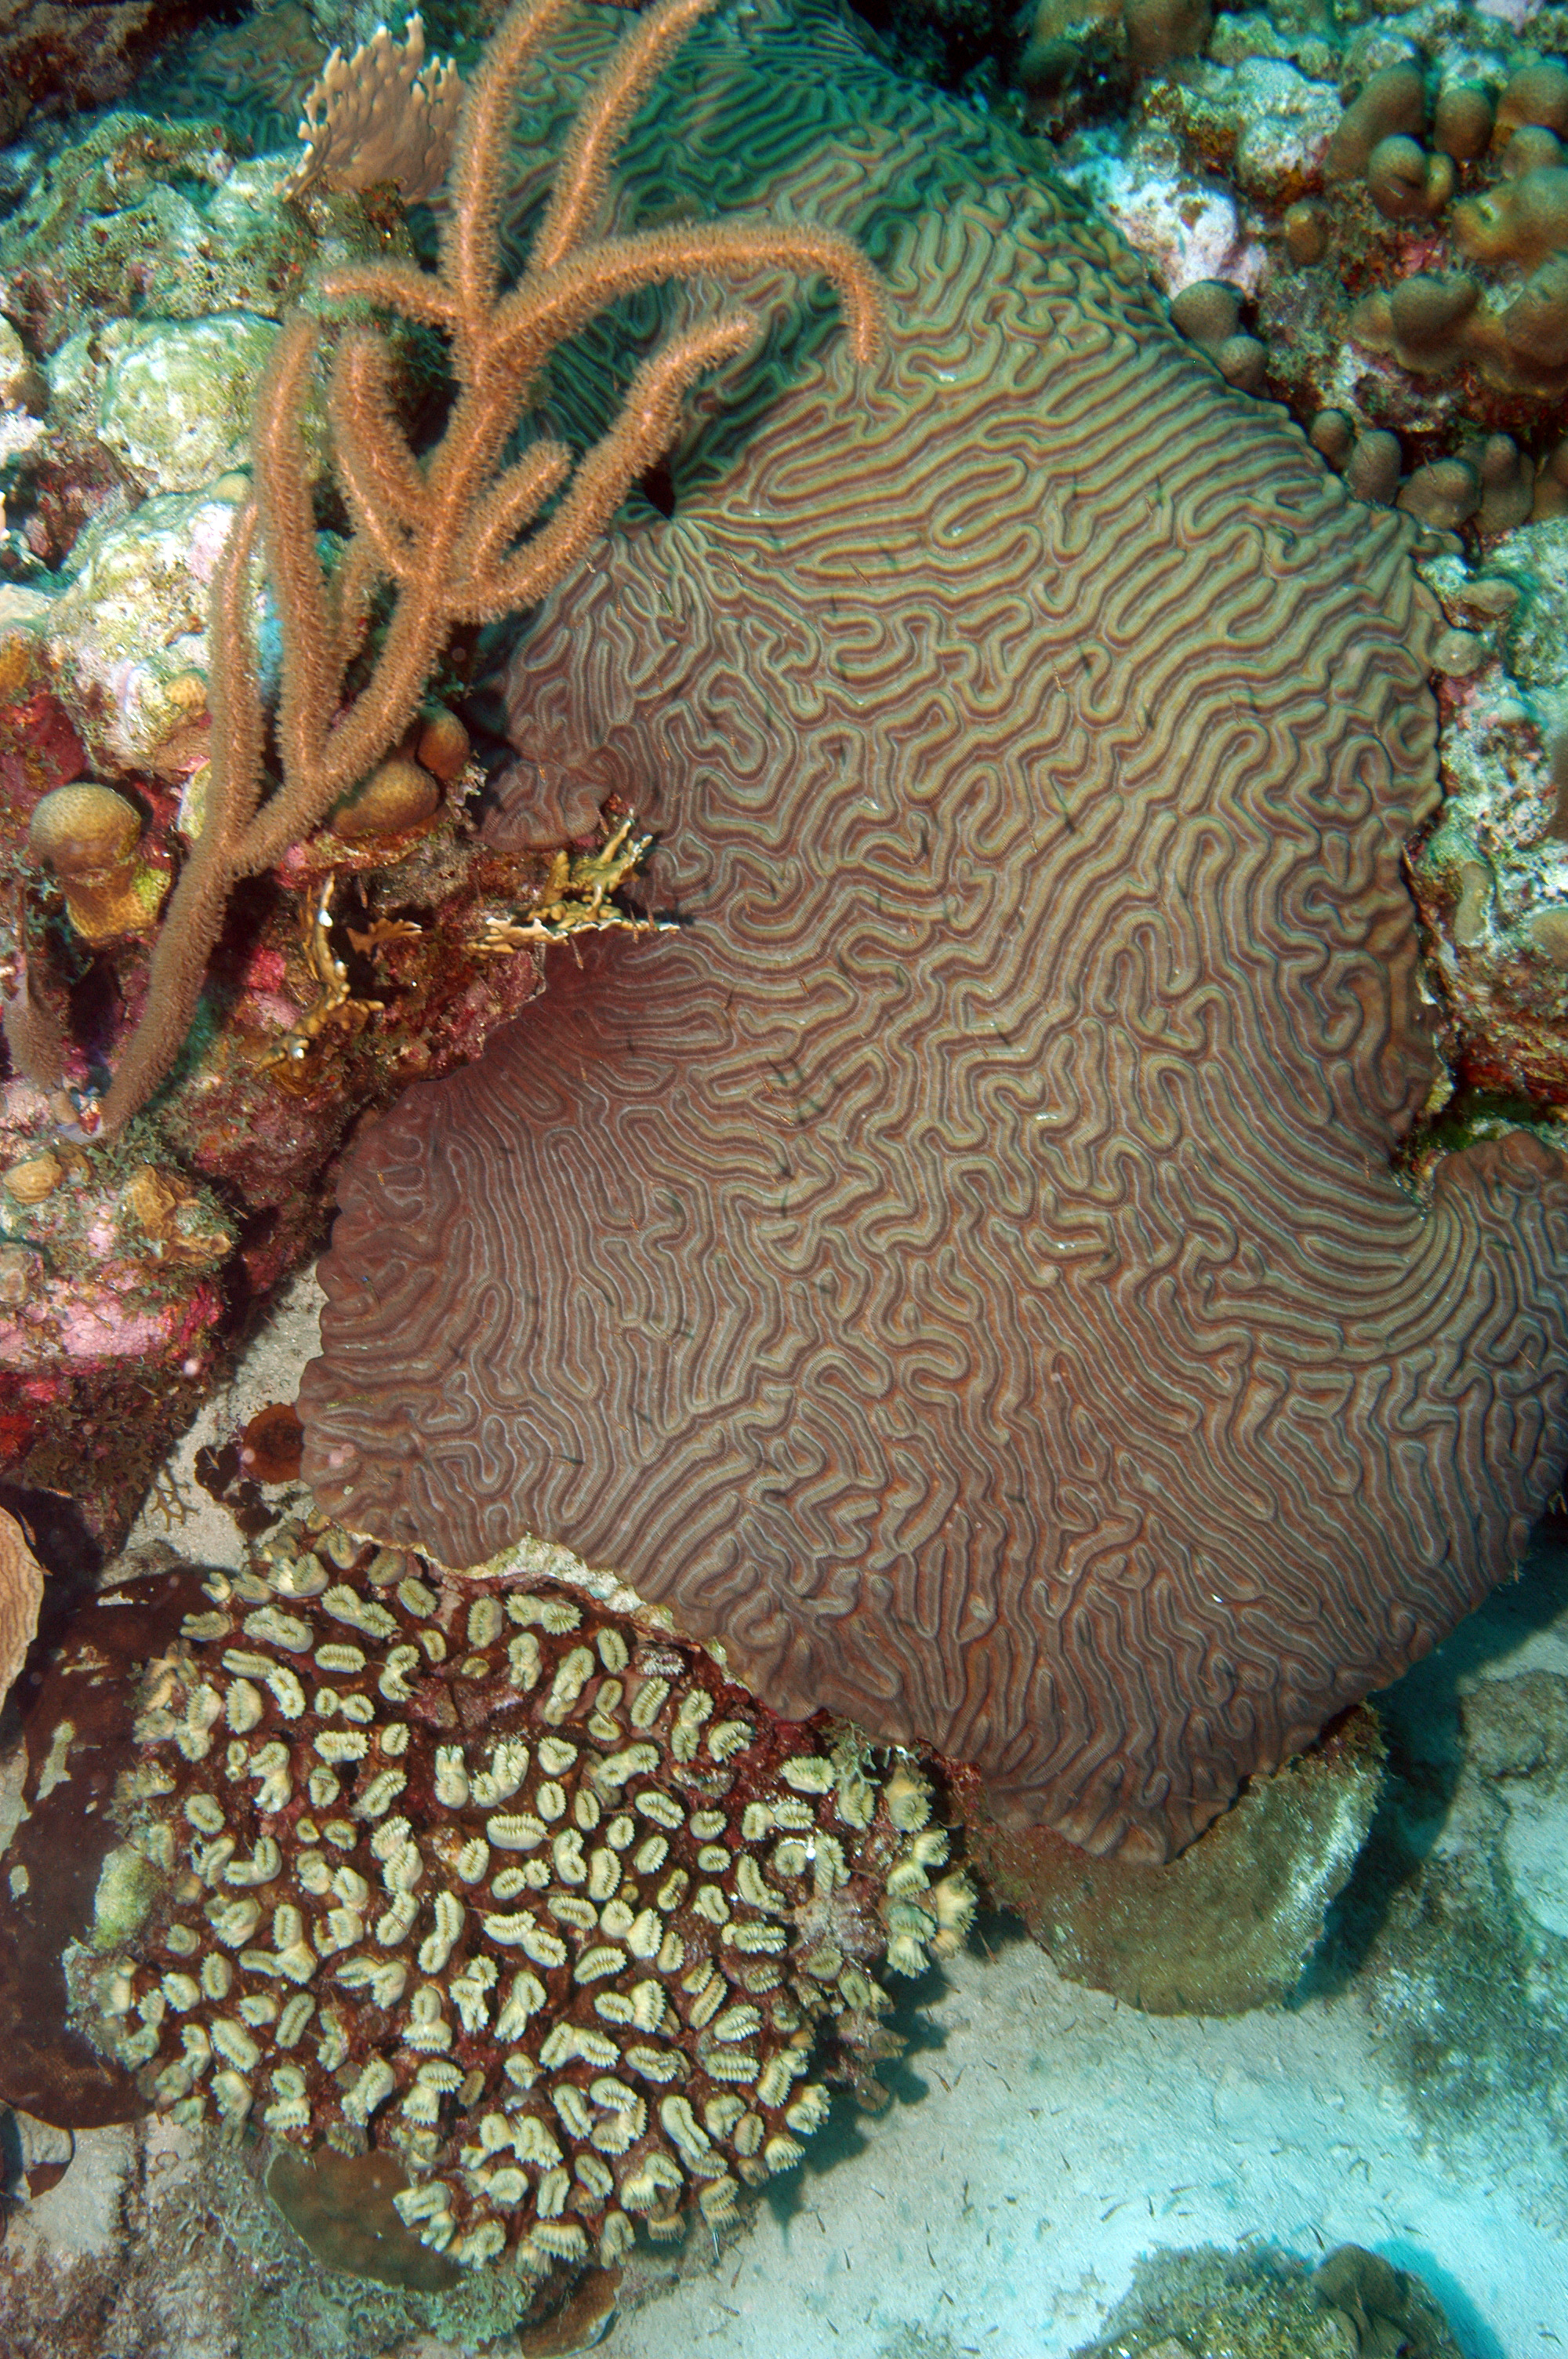 Large brain coral formations intermingle with other coral structures providing homes to reef fish at Eastern Dry Rock in Key West, Florida